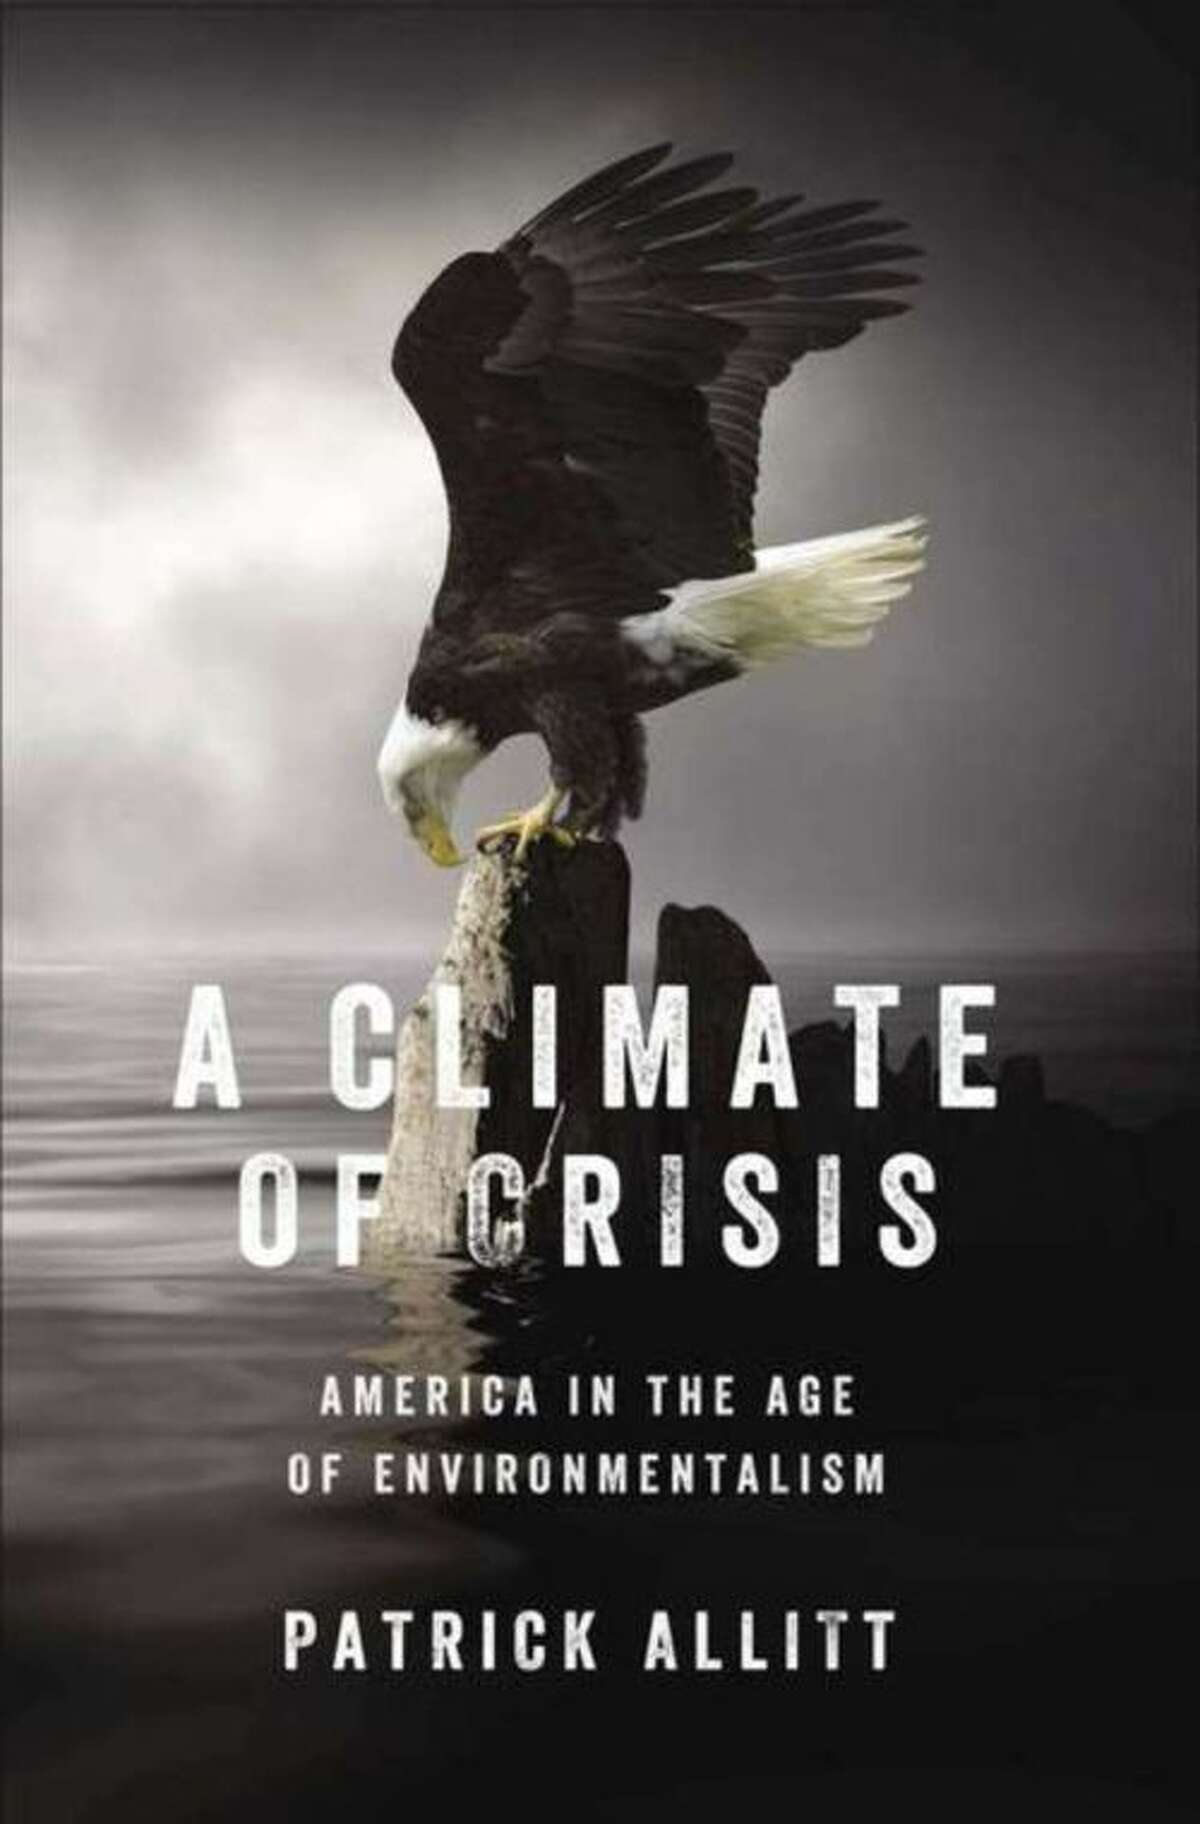 This book cover image released by The Penguin Press shows "A Climate of Crisis: America in the Age of Environmentalism." by Patrick Allitt. (AP Photo/The Penguin Press)